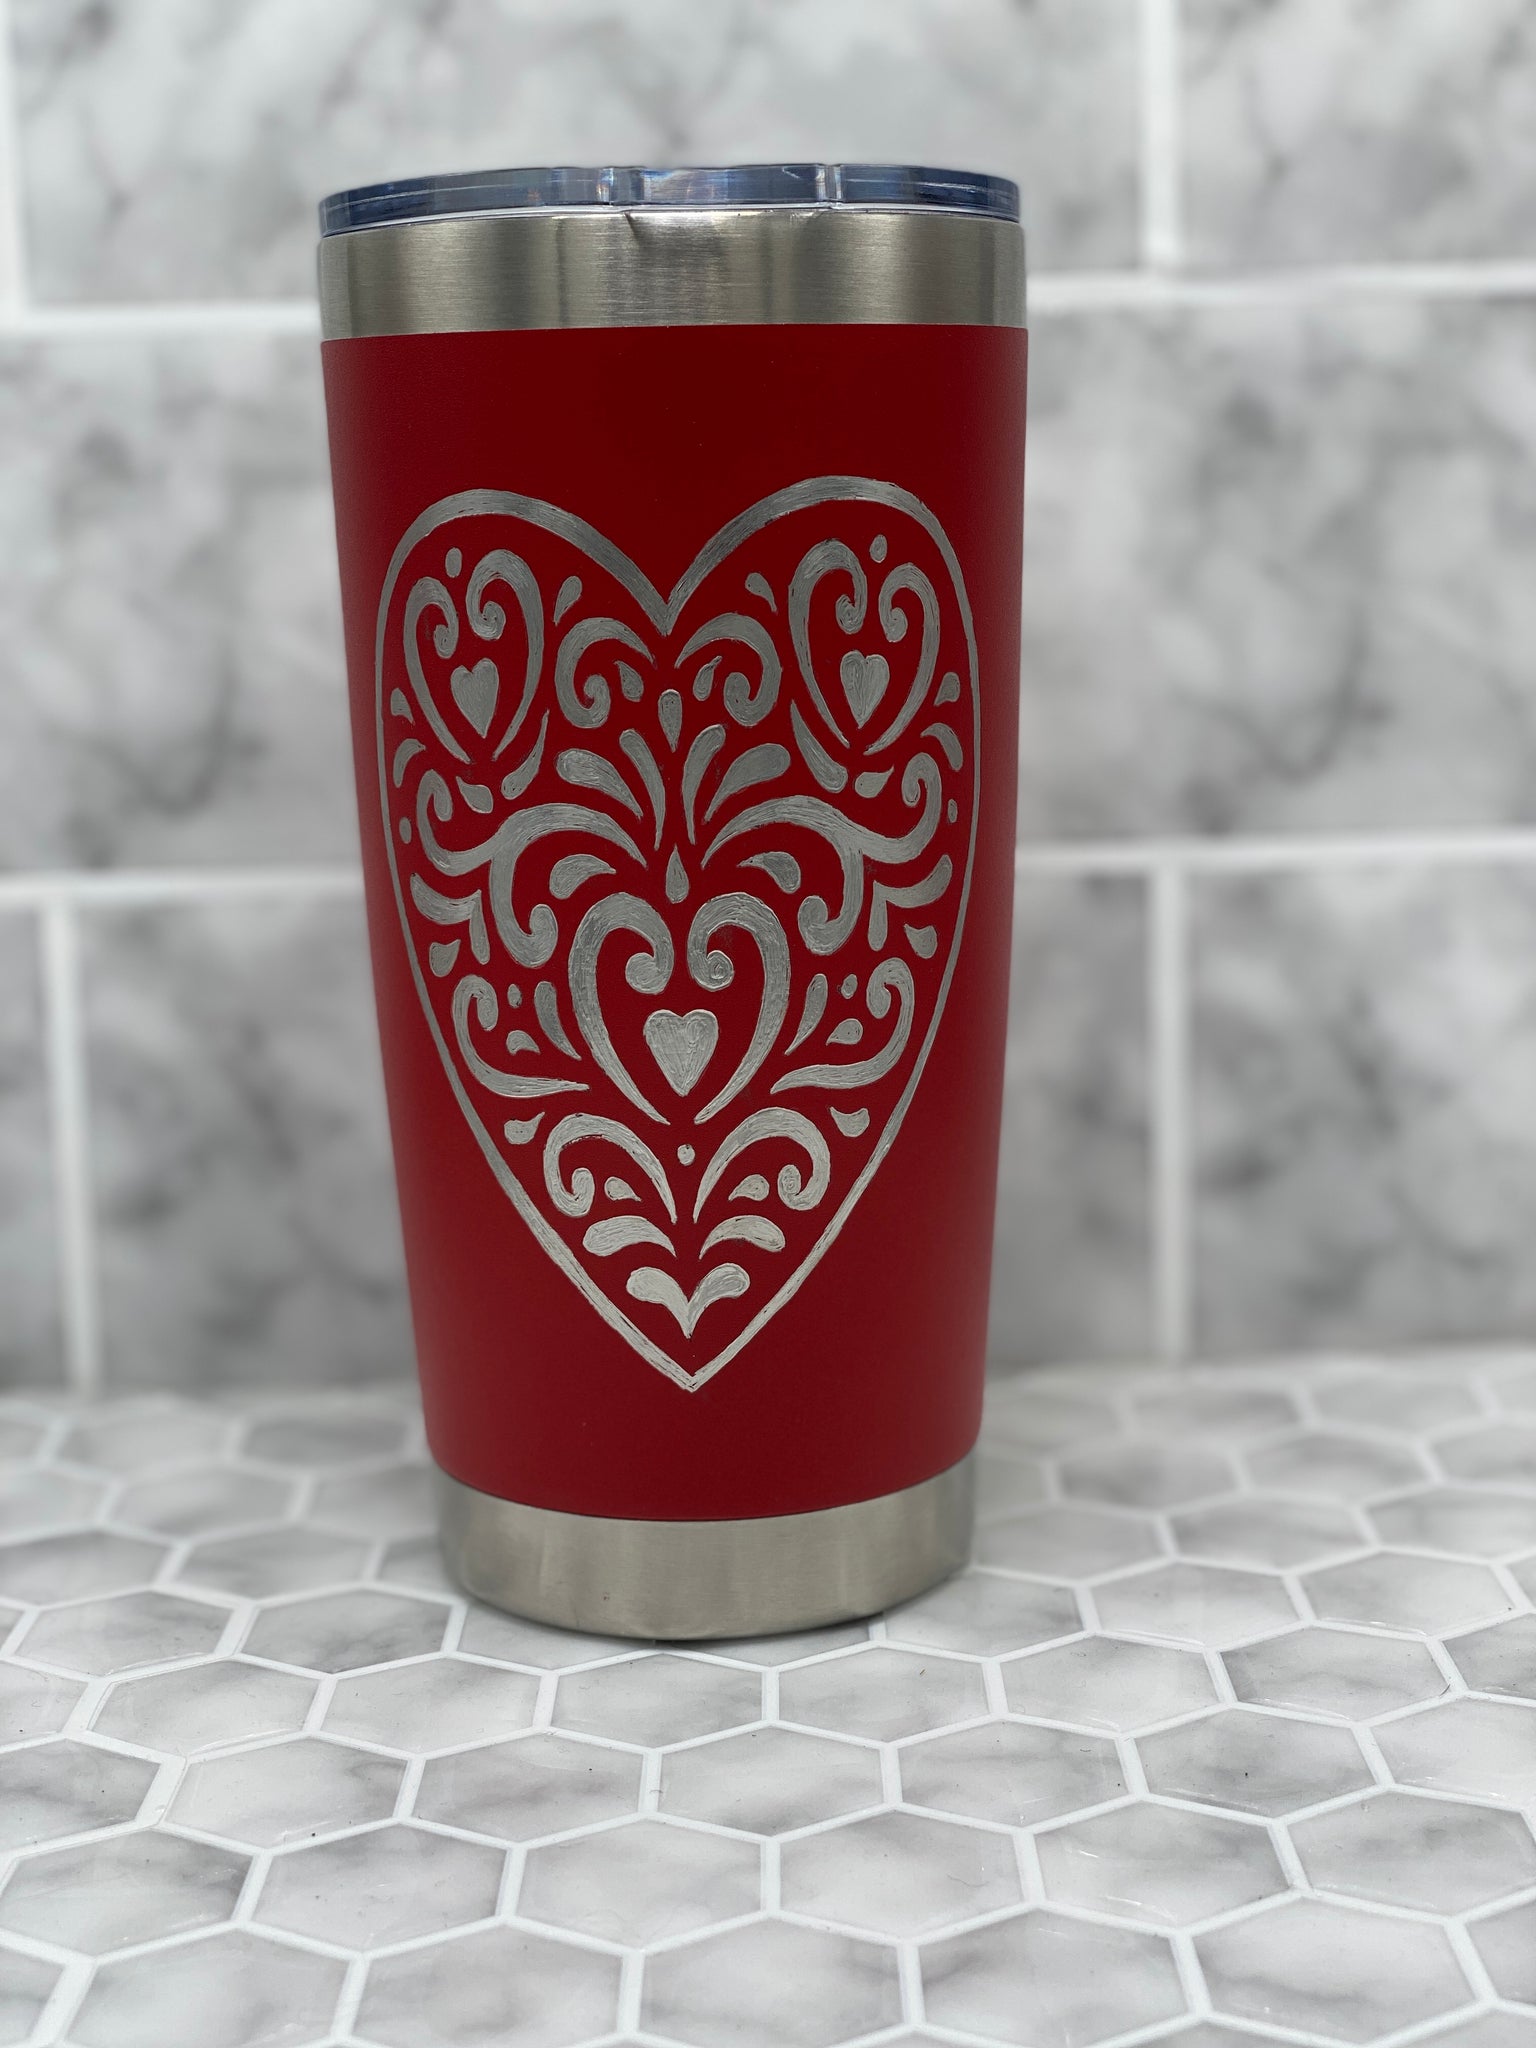 20 Ounce Red Beverage Tumbler with Hand Engraved Heart Folklore Image